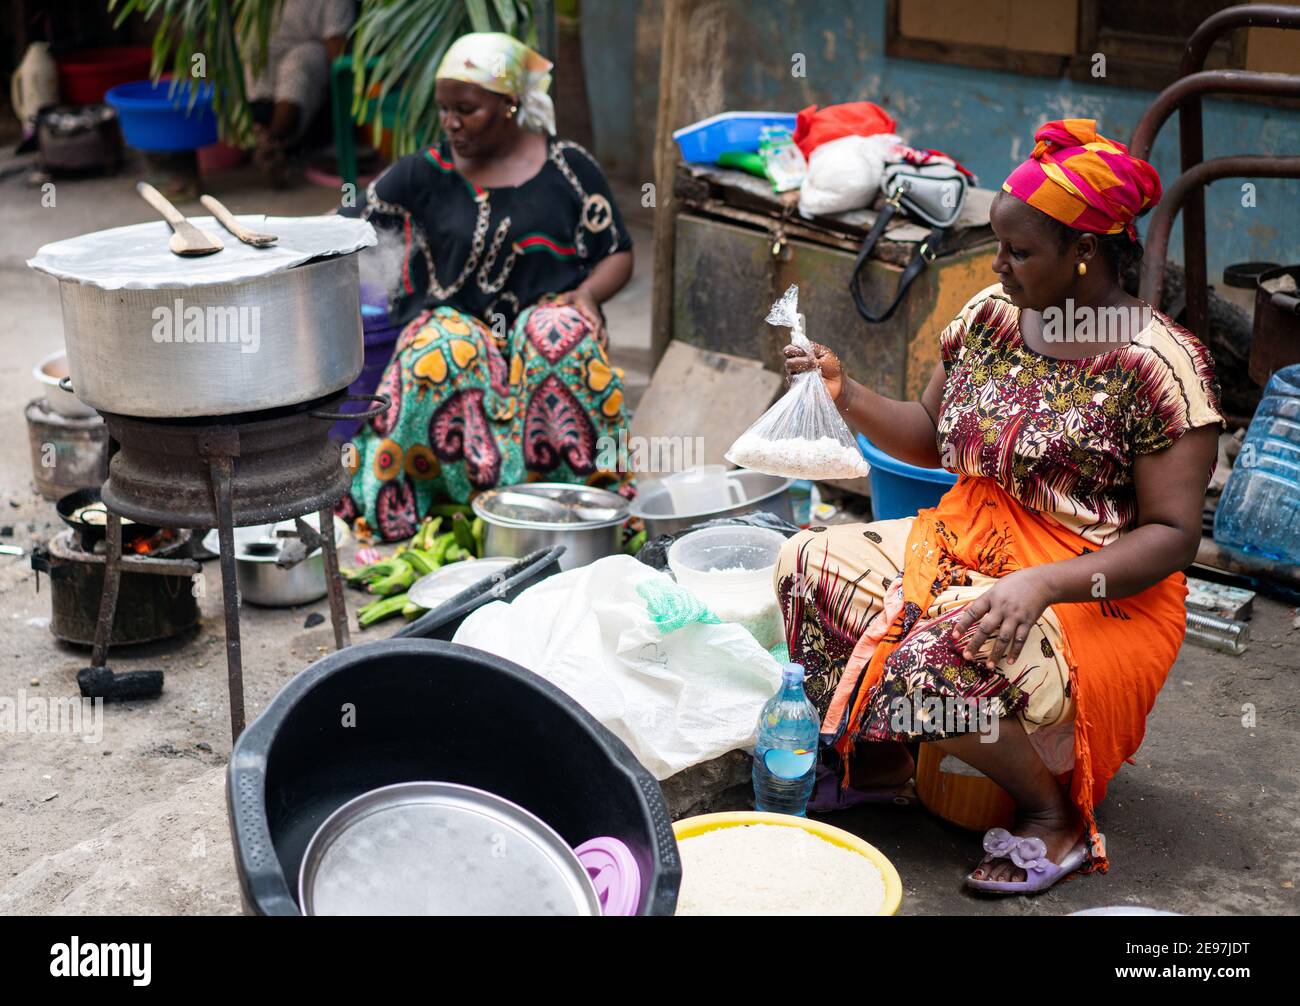 Black African woman cooking and selling street food Stock Photo